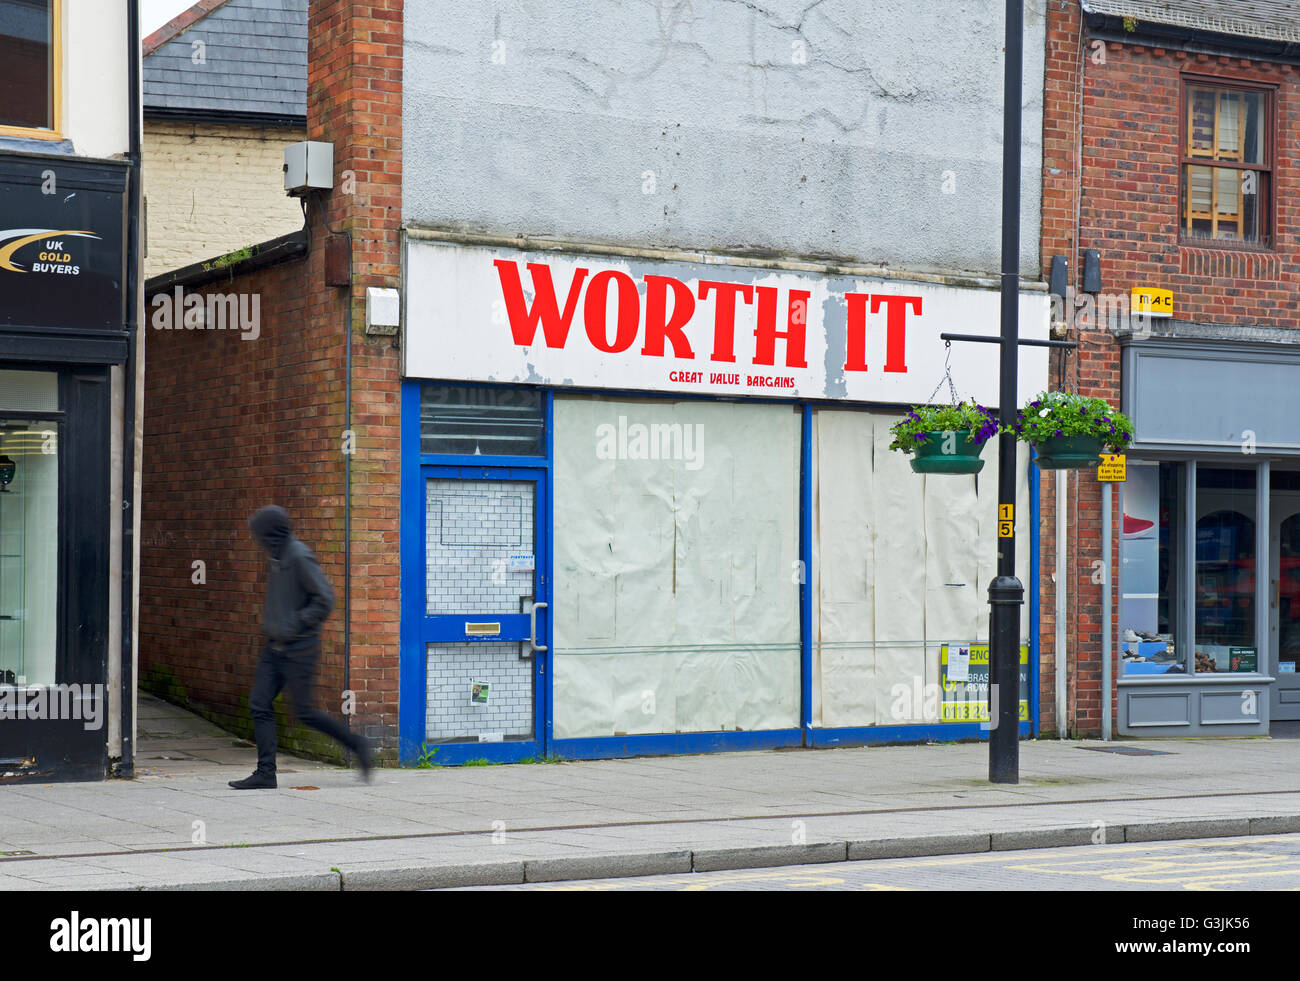 Shop - Worth It - closed down and out of business, England UK Stock Photo